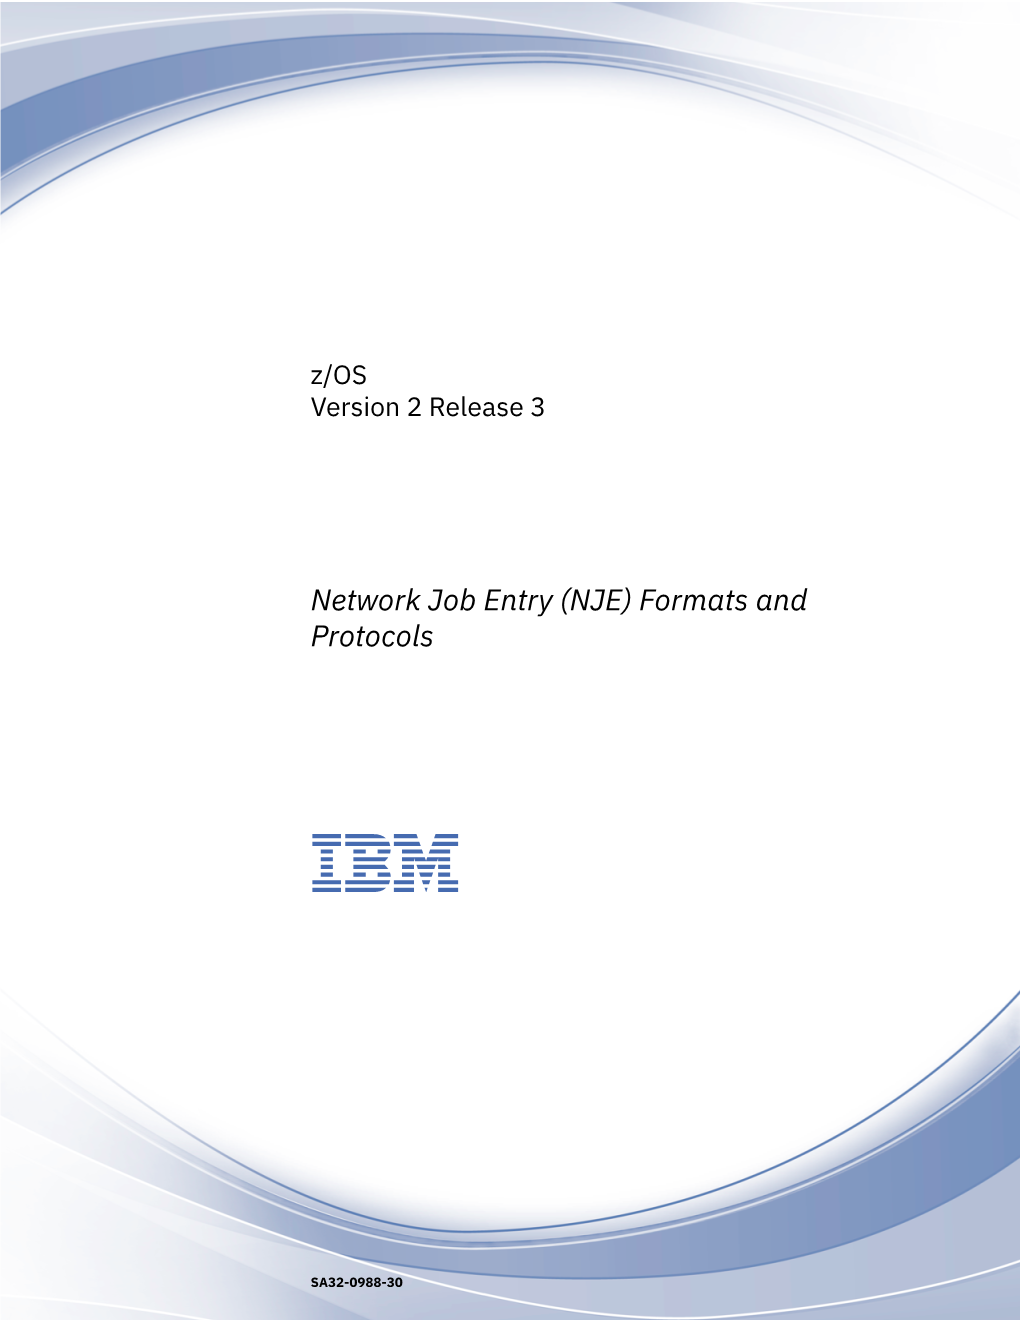 Z/OS: Network Job Entry (NJE) Formats and Protocols How to Send Your Comments to IBM